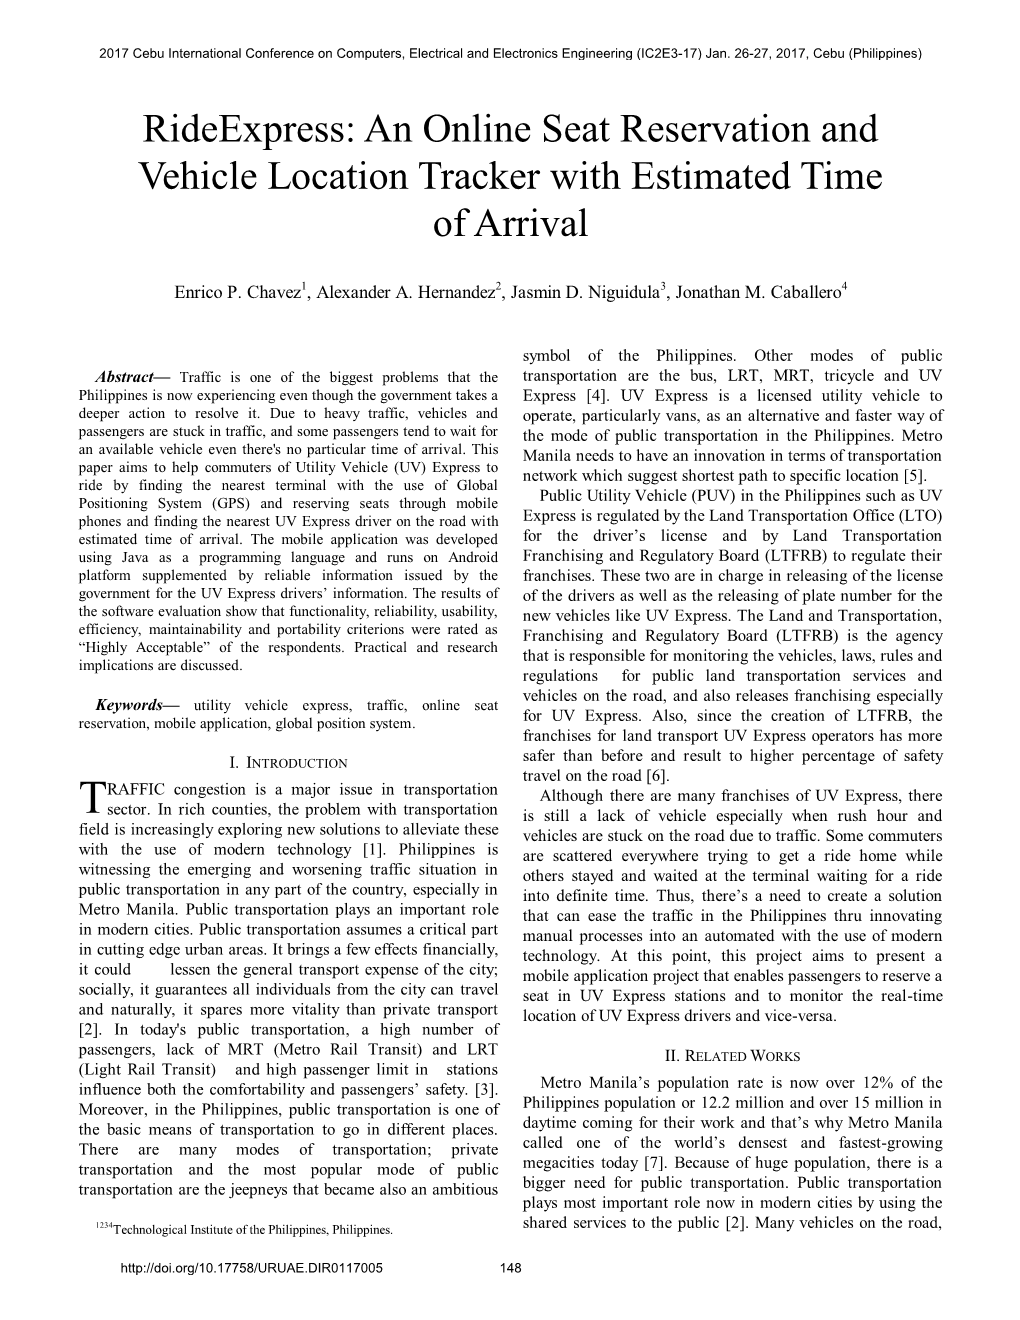 An Online Seat Reservation and Vehicle Location Tracker with Estimated Time of Arrival